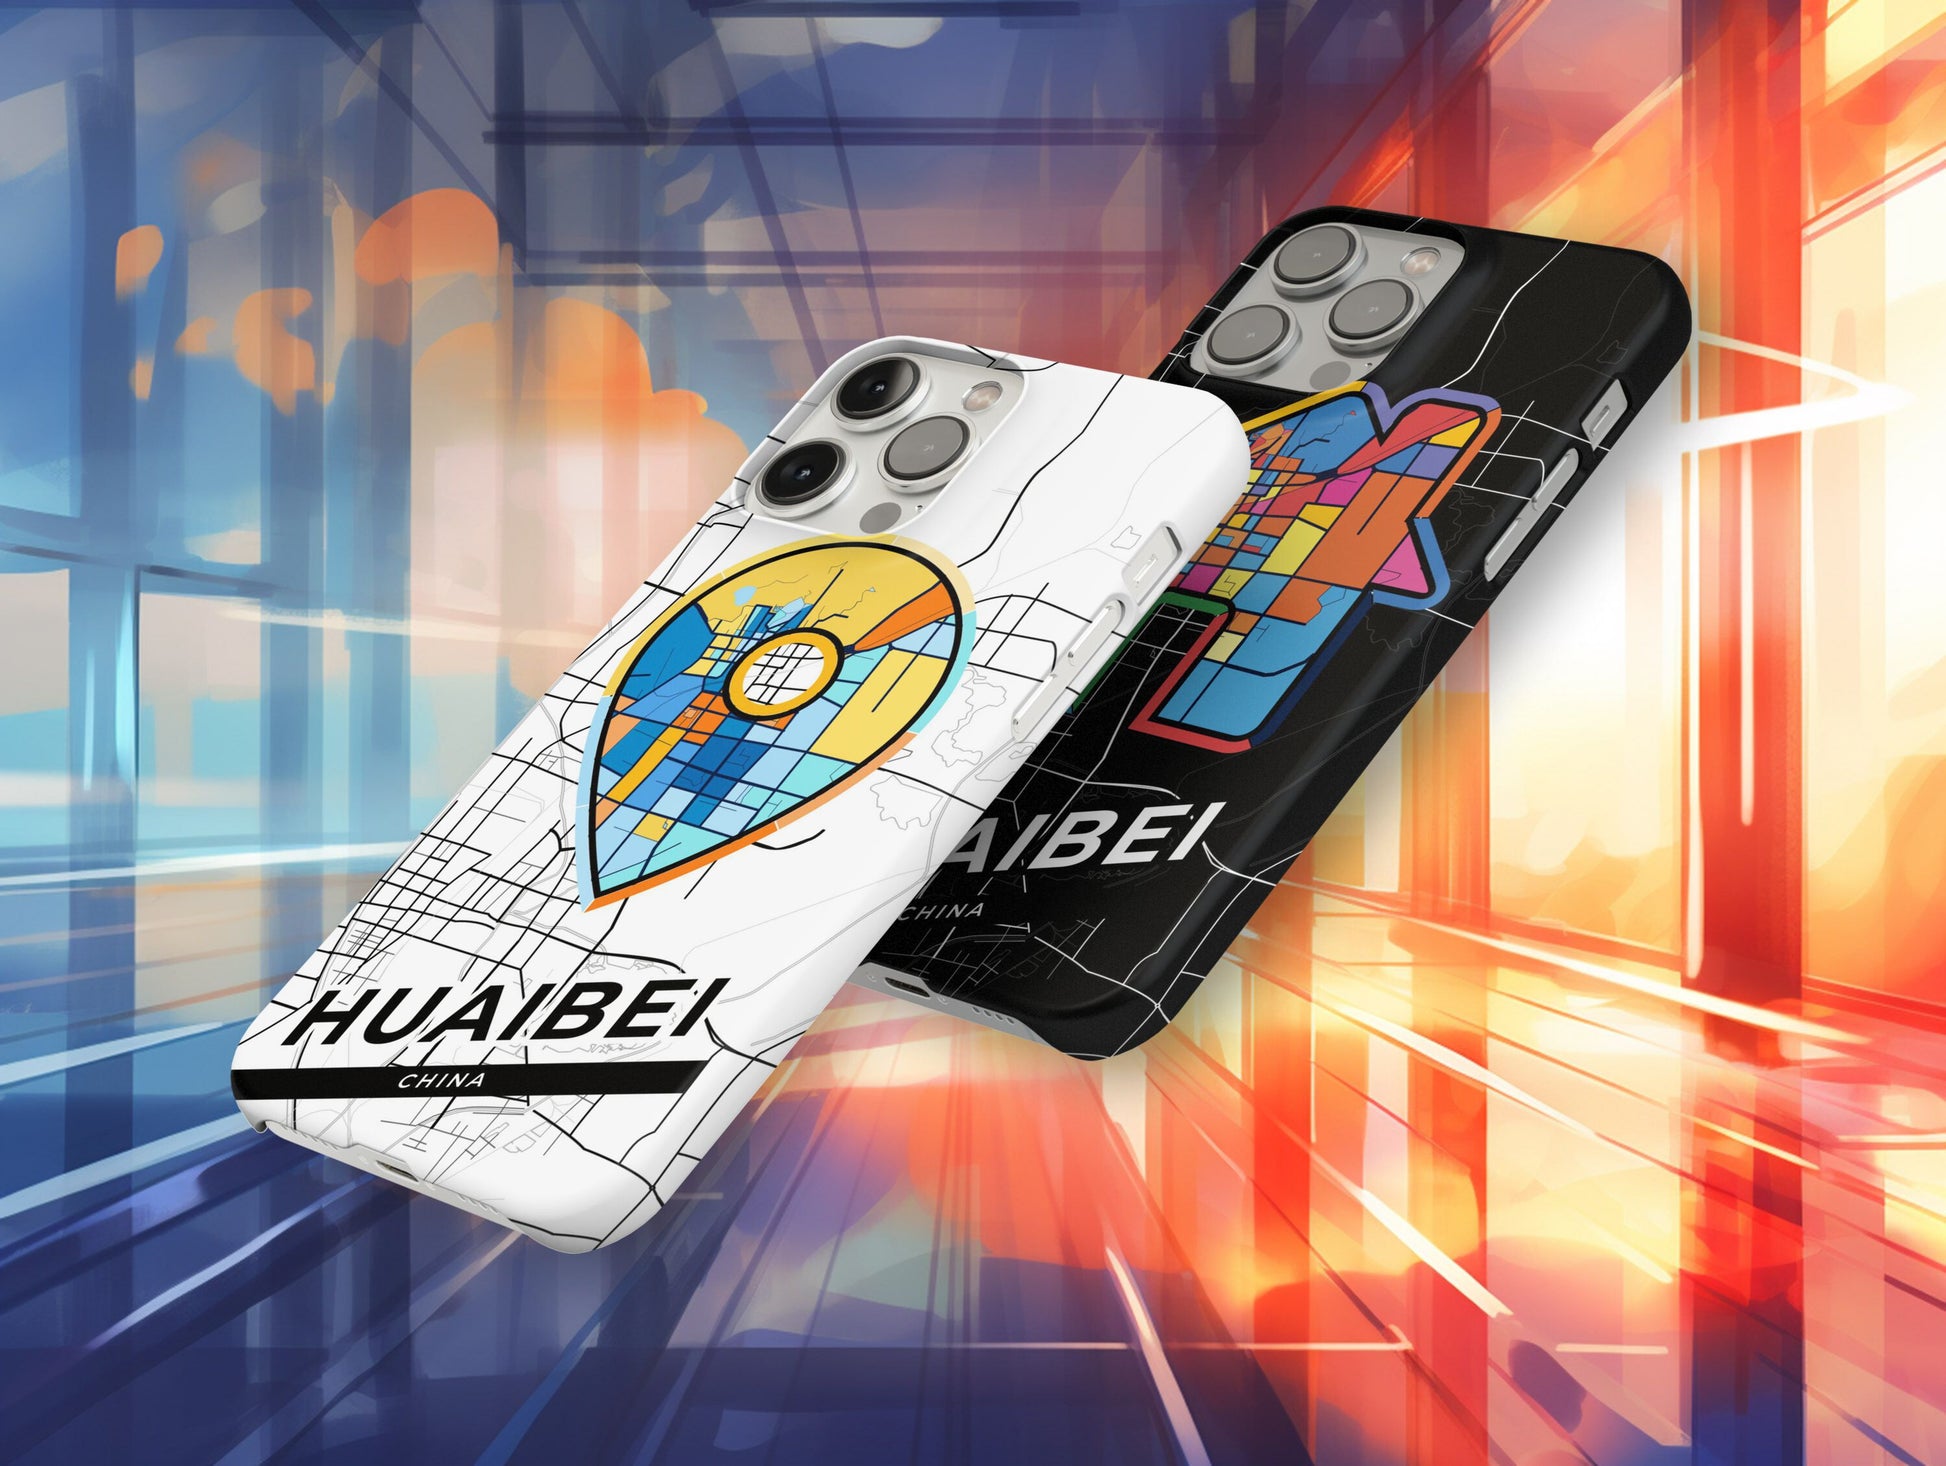 Huaibei China slim phone case with colorful icon. Birthday, wedding or housewarming gift. Couple match cases.